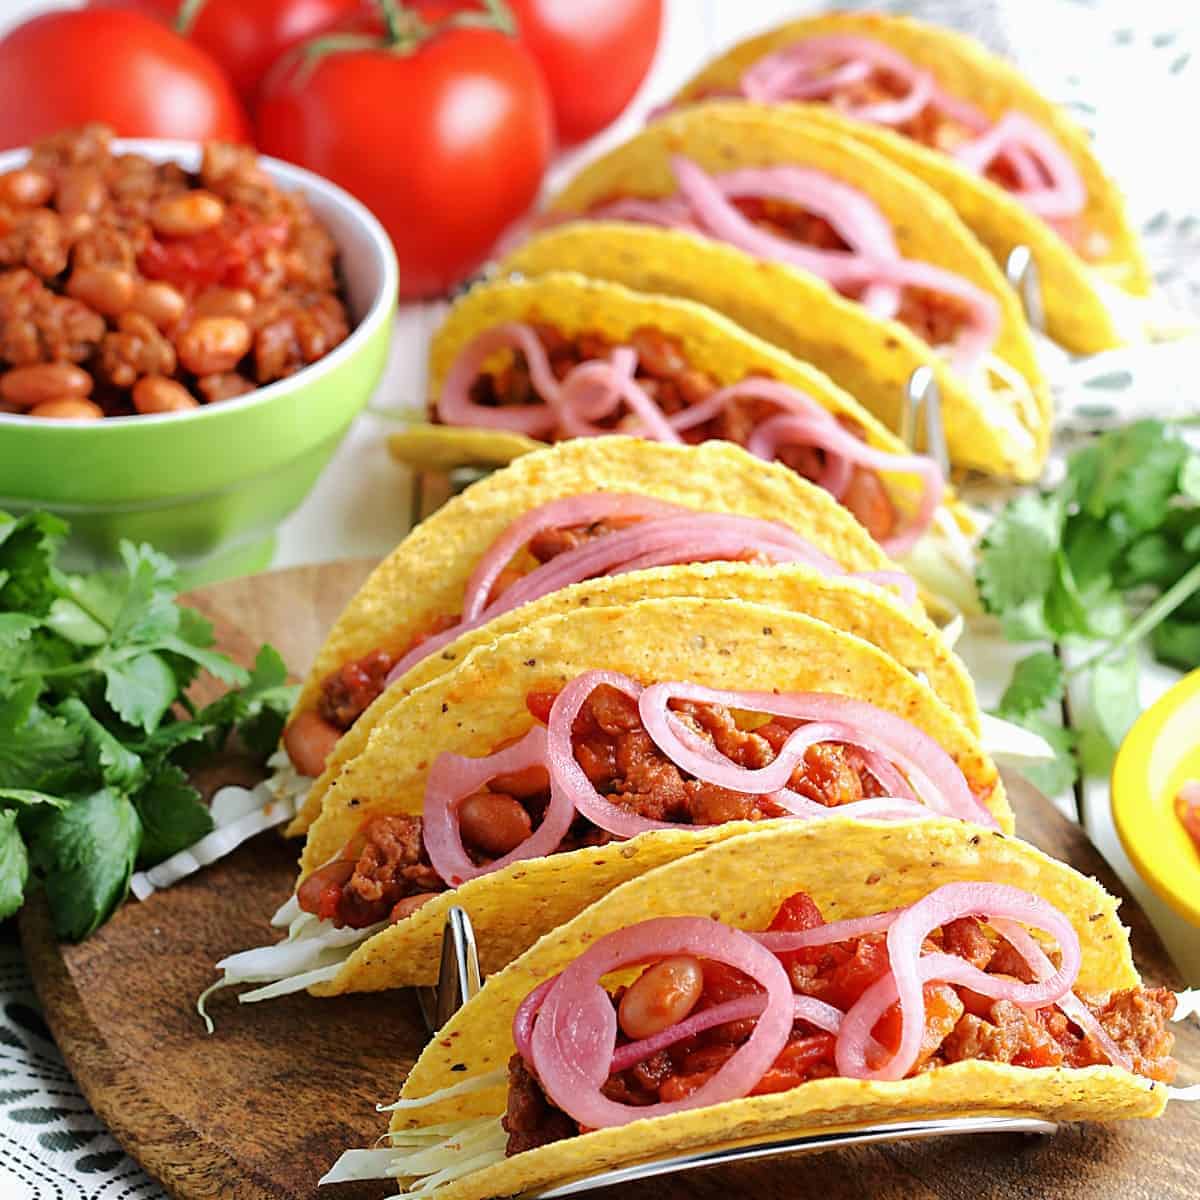 Six tacos lined up and ready to eat.